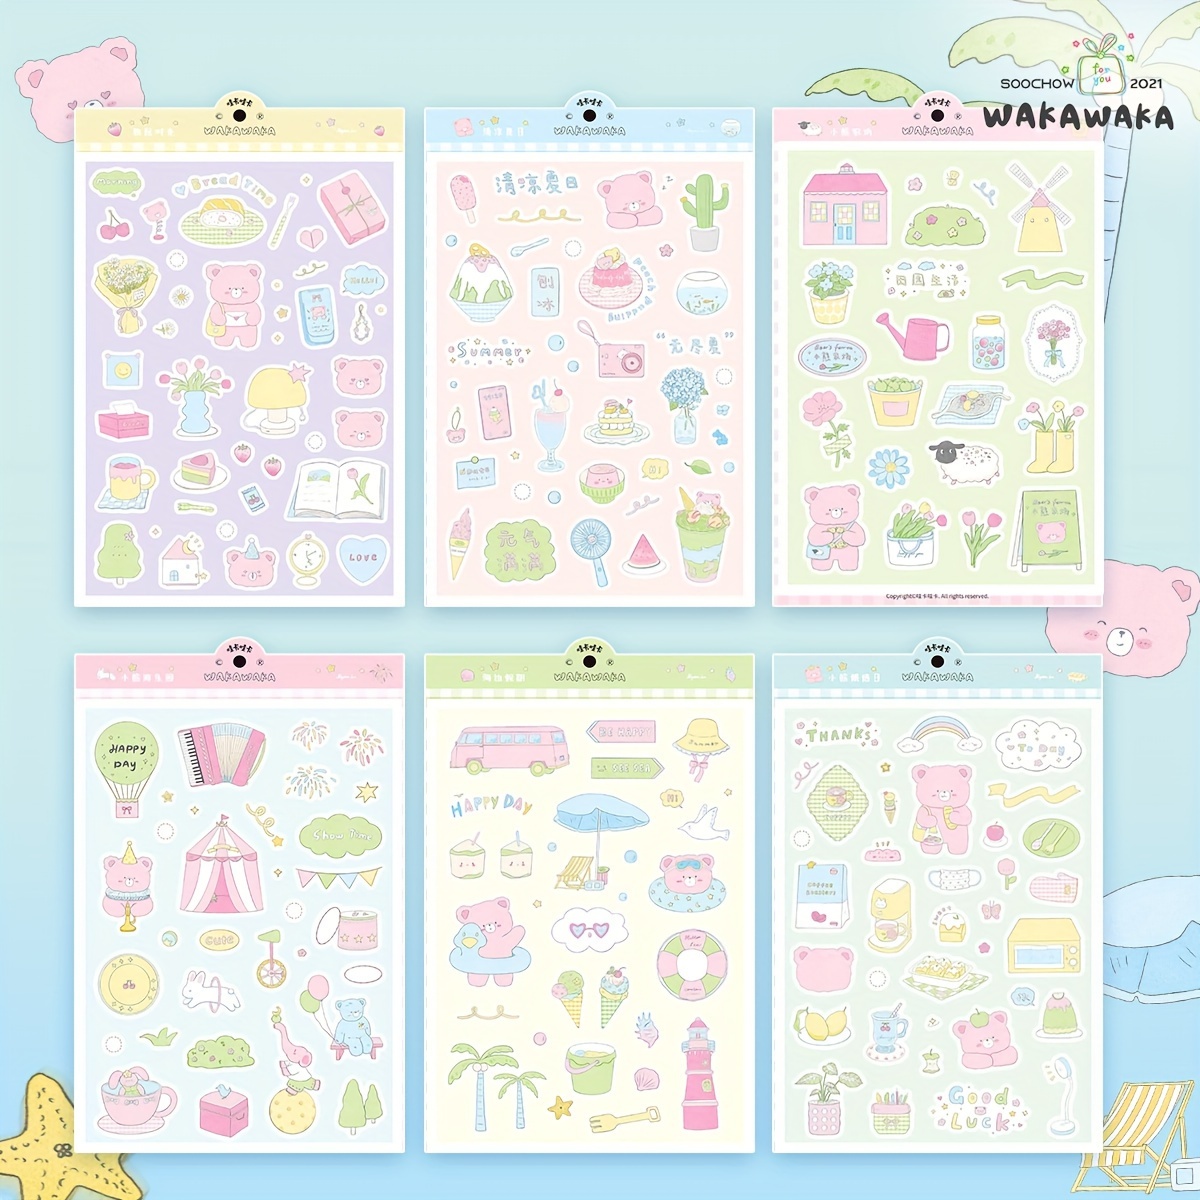 BIKIBIBY｜Cute Bear Stickers Pack of 100Pcs｜Kawaii Bear Stickers,Kawaii  Stickers for Kids,Waterproof Stickers for Laptop,Hydro Flask,Phone.(Small  Size)